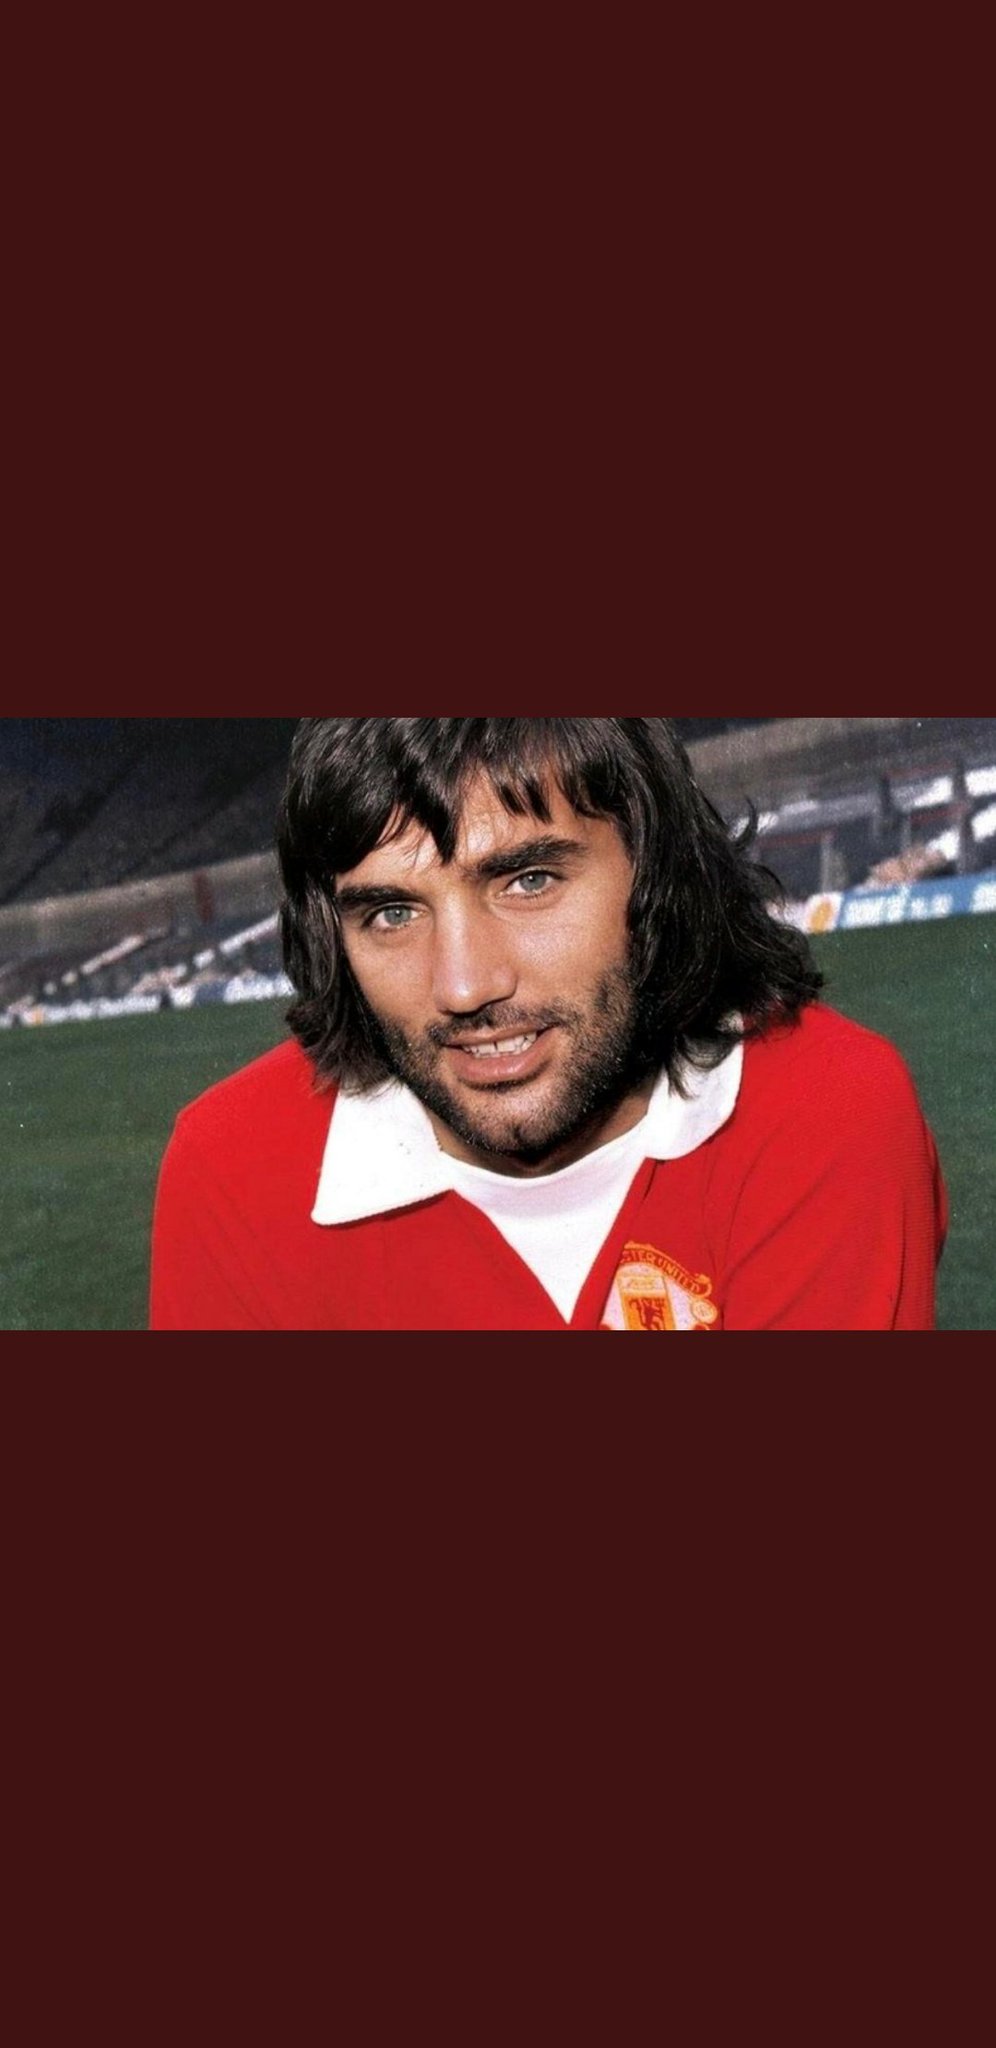 HAPPY BIRTHDAY GEORGE BEST ... 74 today.. gone but never forgotten, 